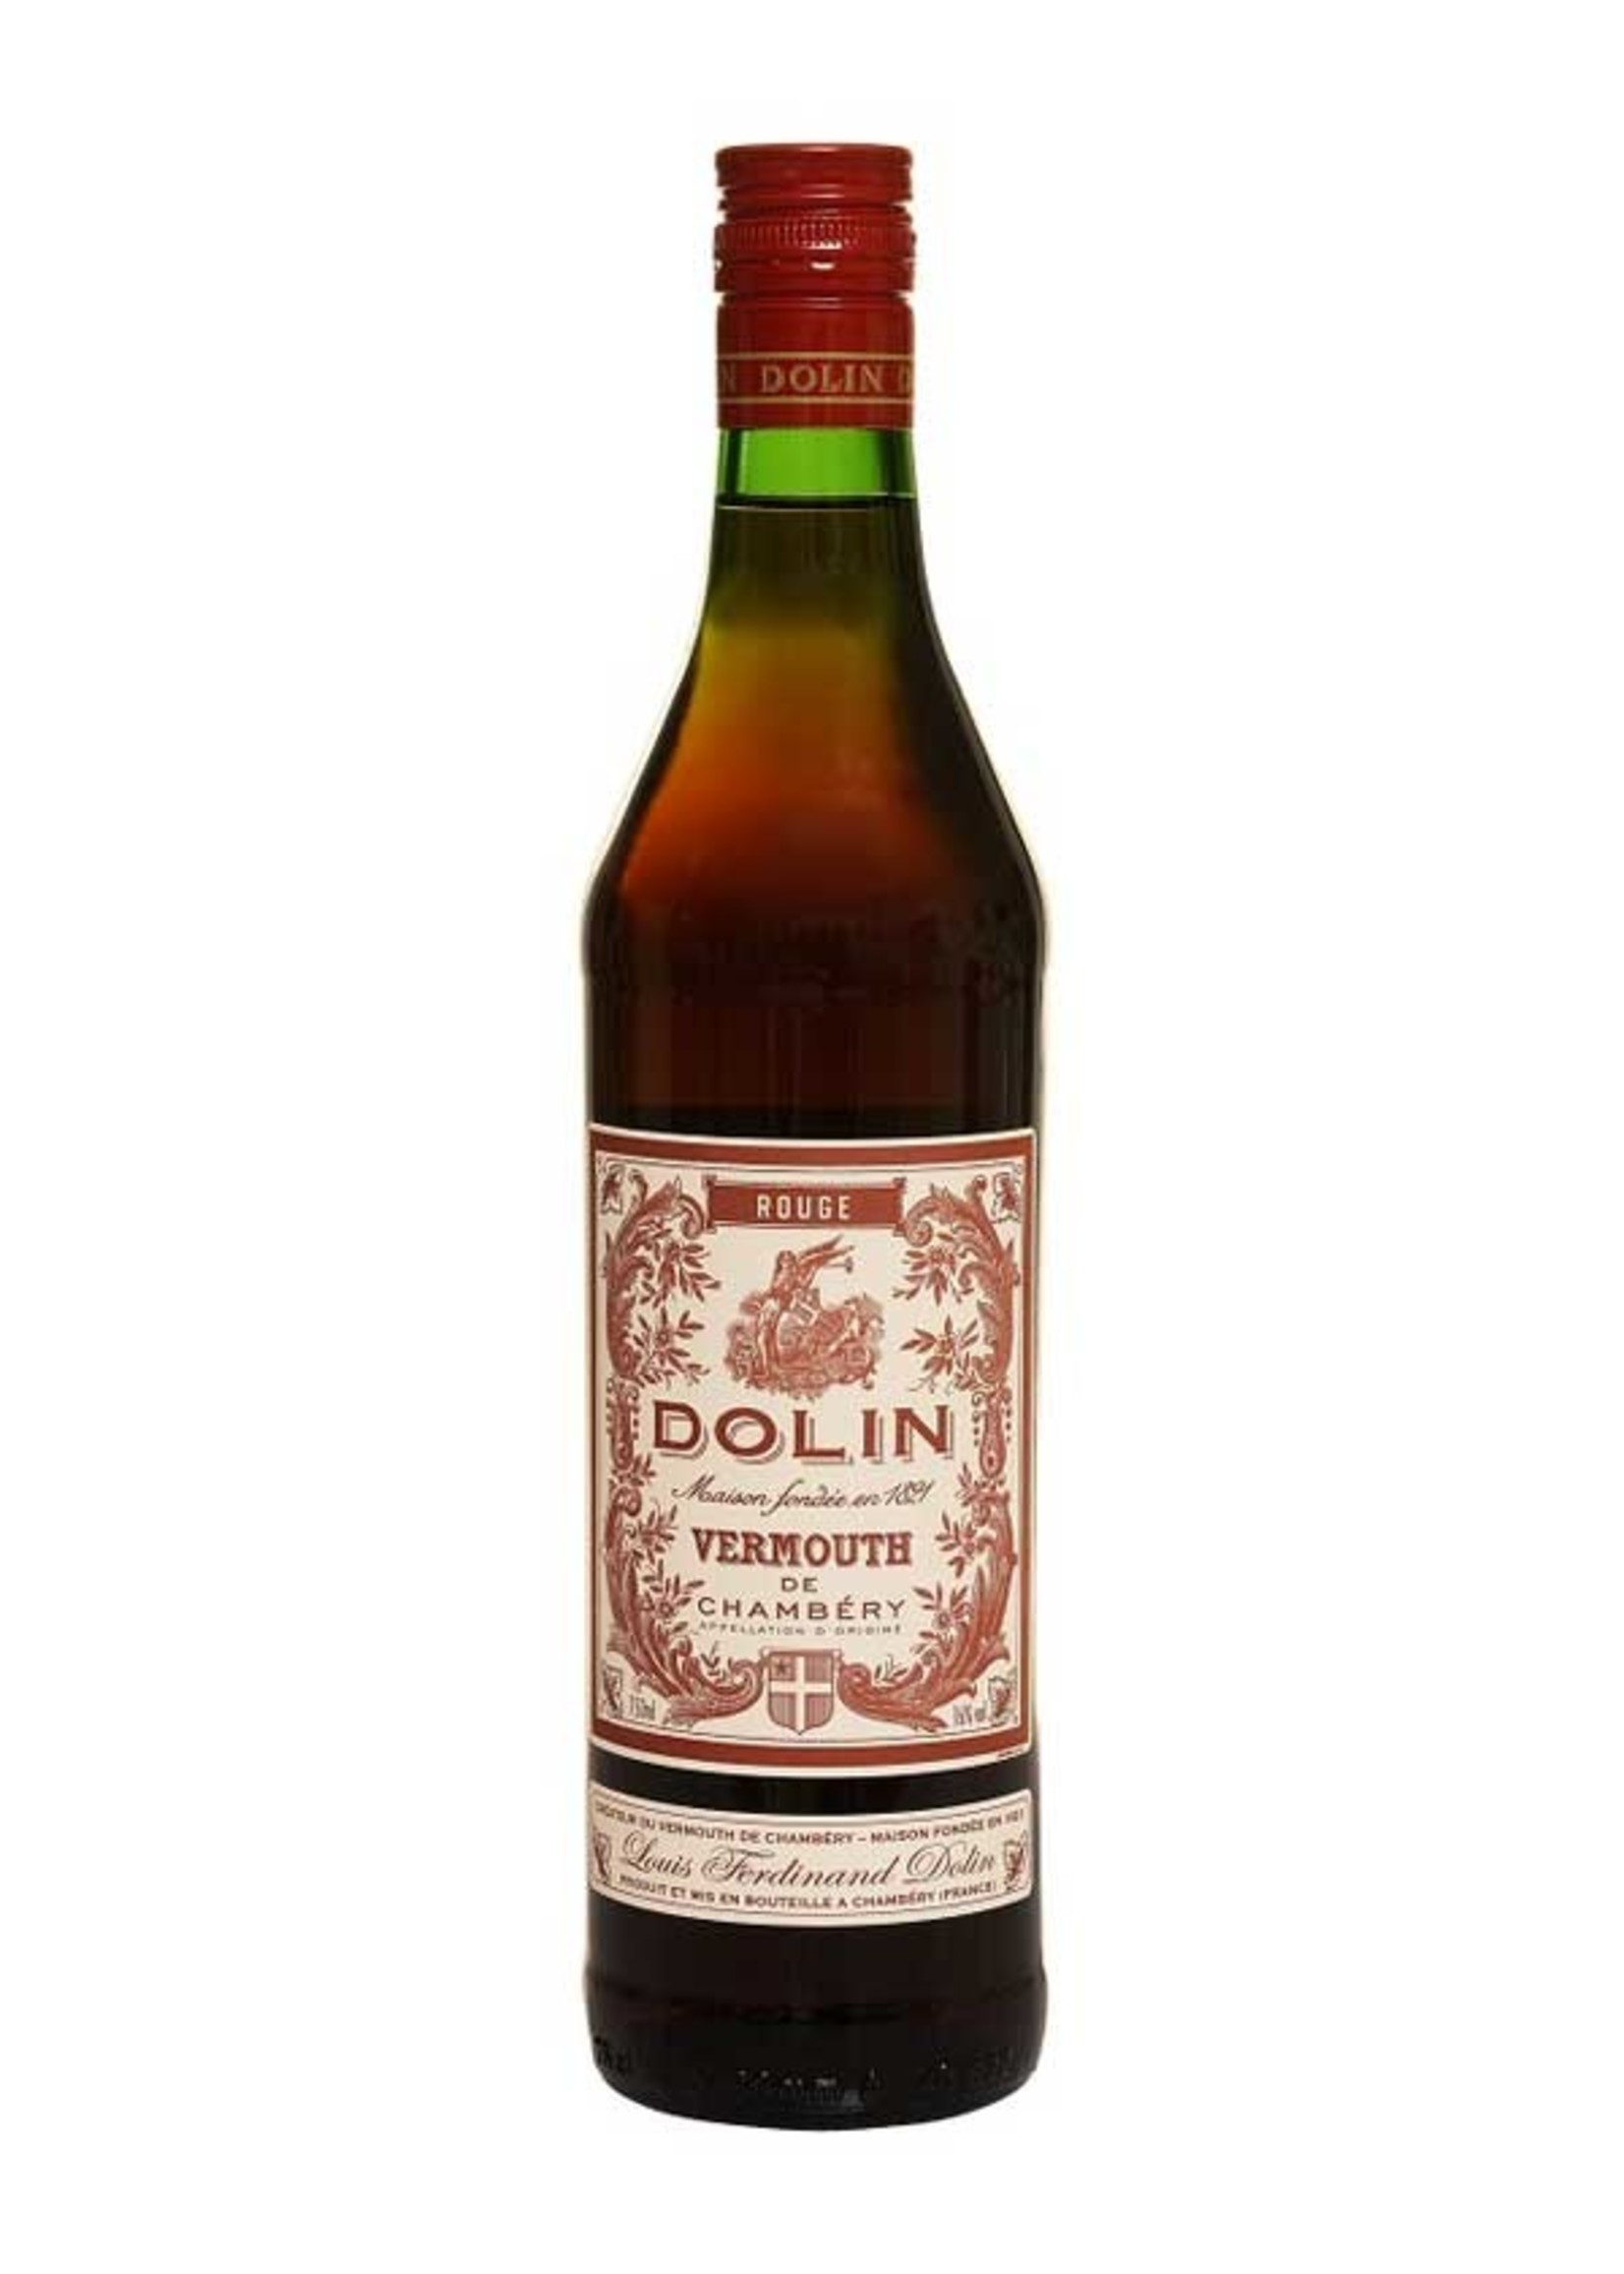 DOLIN DOLIN	VERMOUTH DE CHAMBERY ROUGE 	.750L